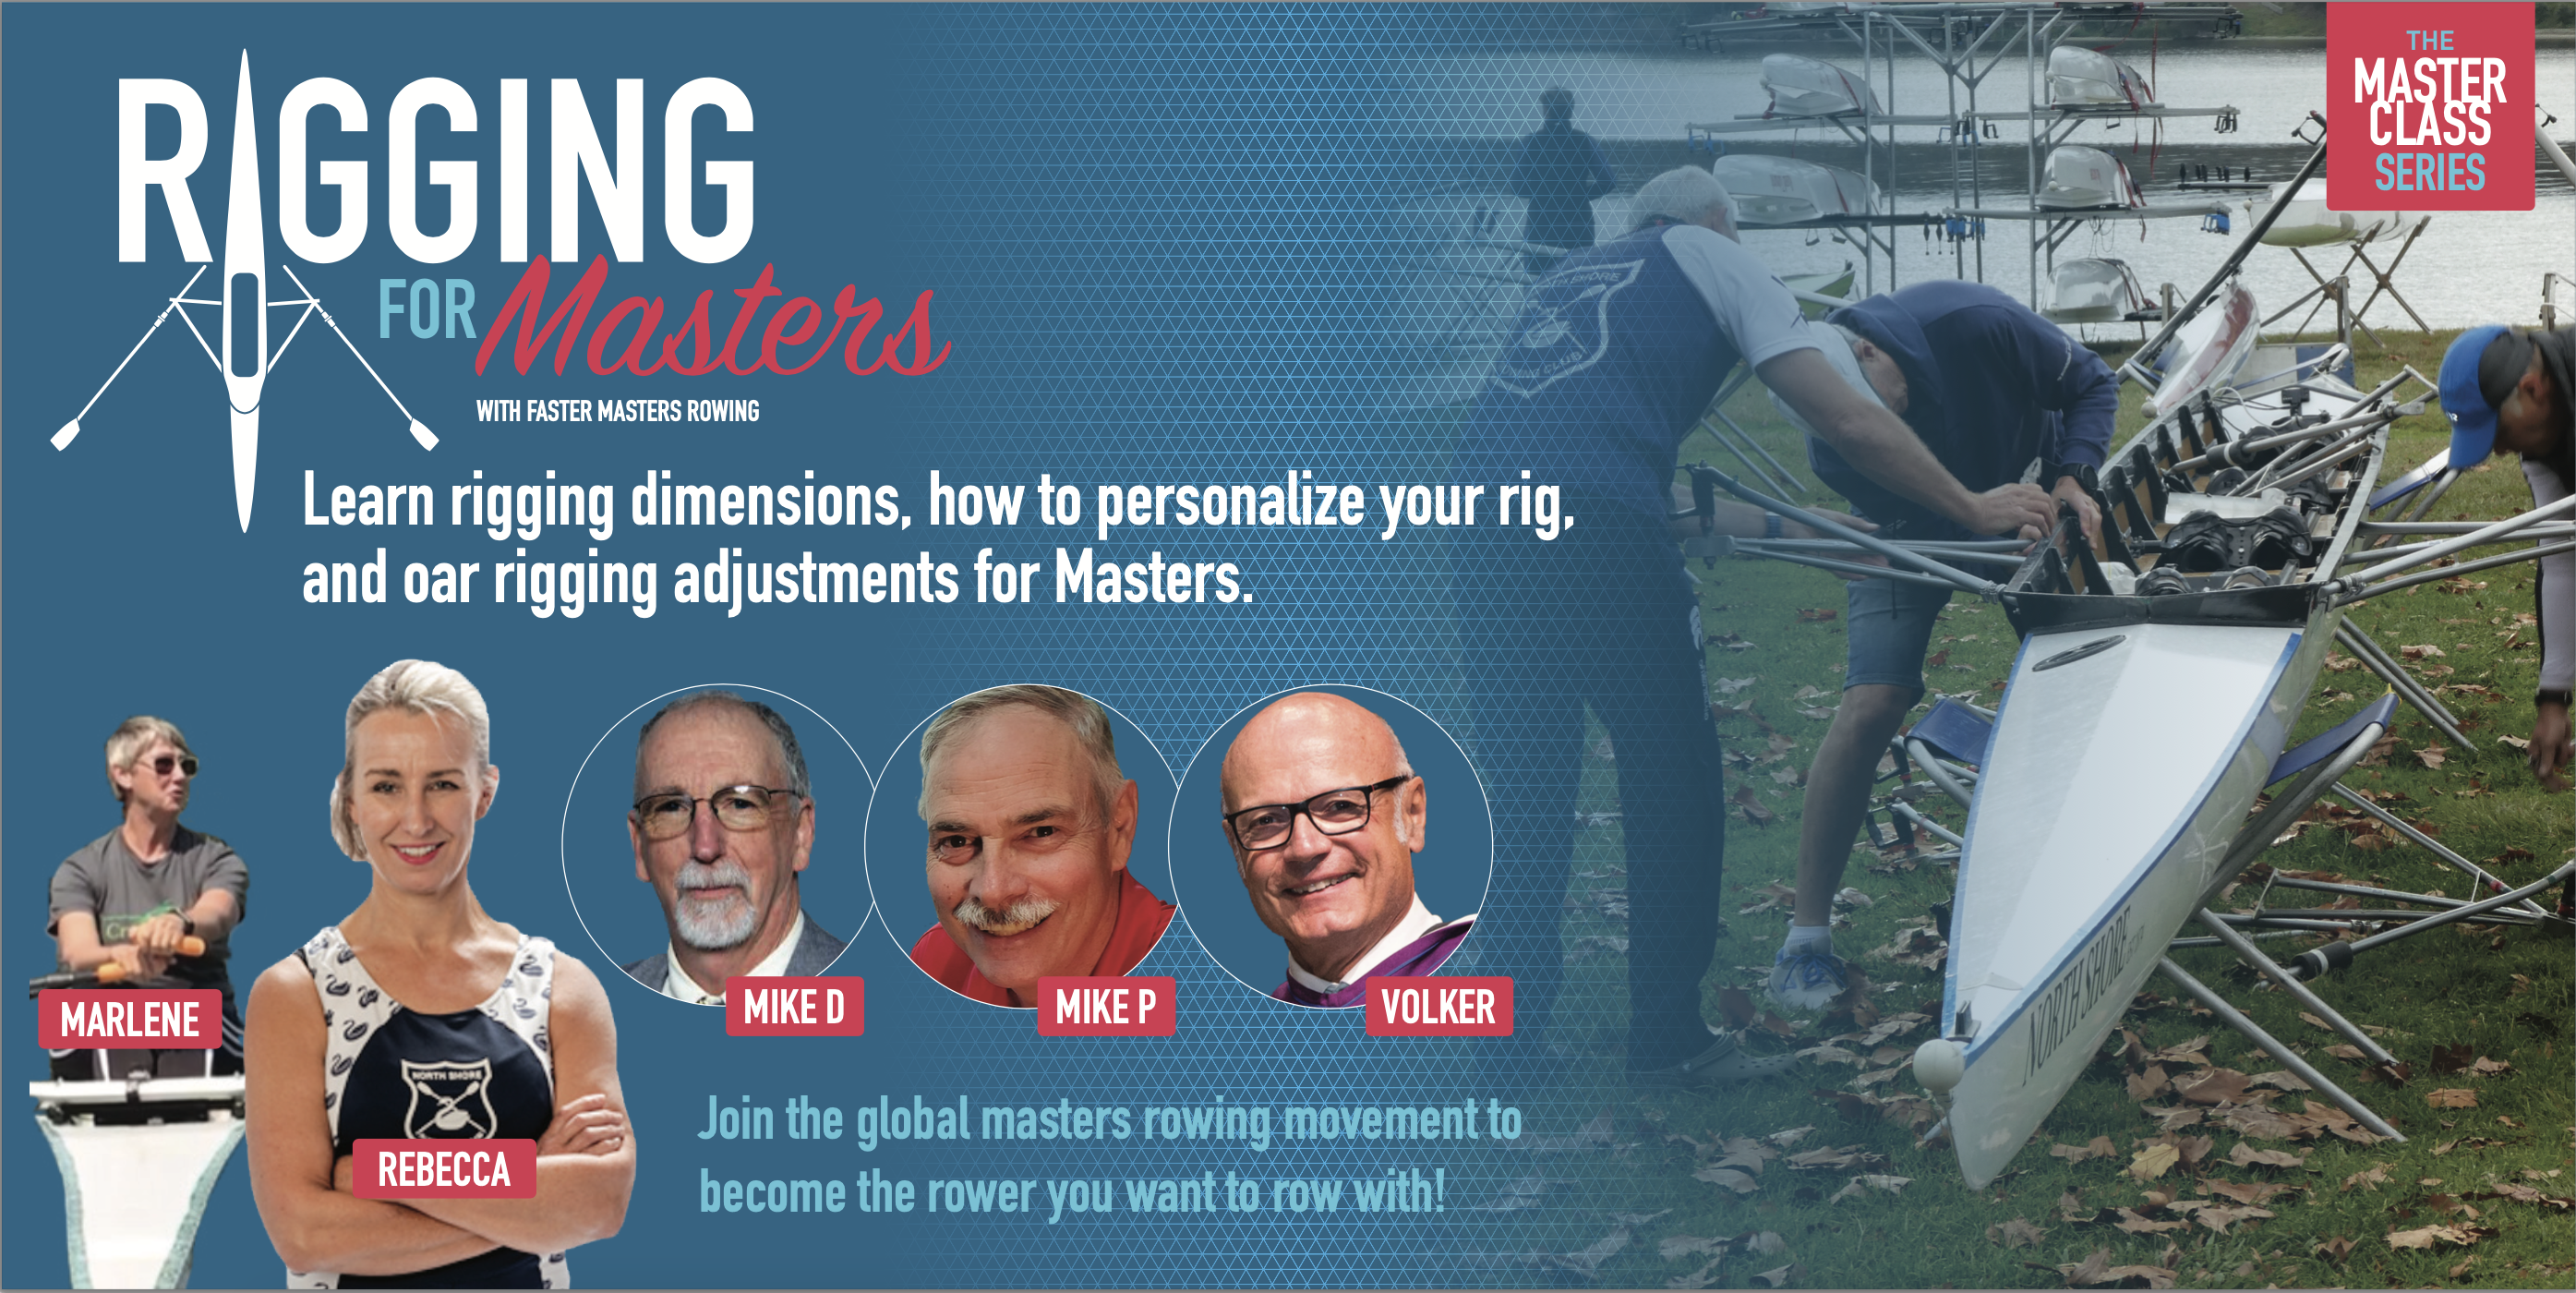 Learn rowing boat rigging from Mike Davenport, Mike Purcer, Volker Nolte how to adjust rig as you age.